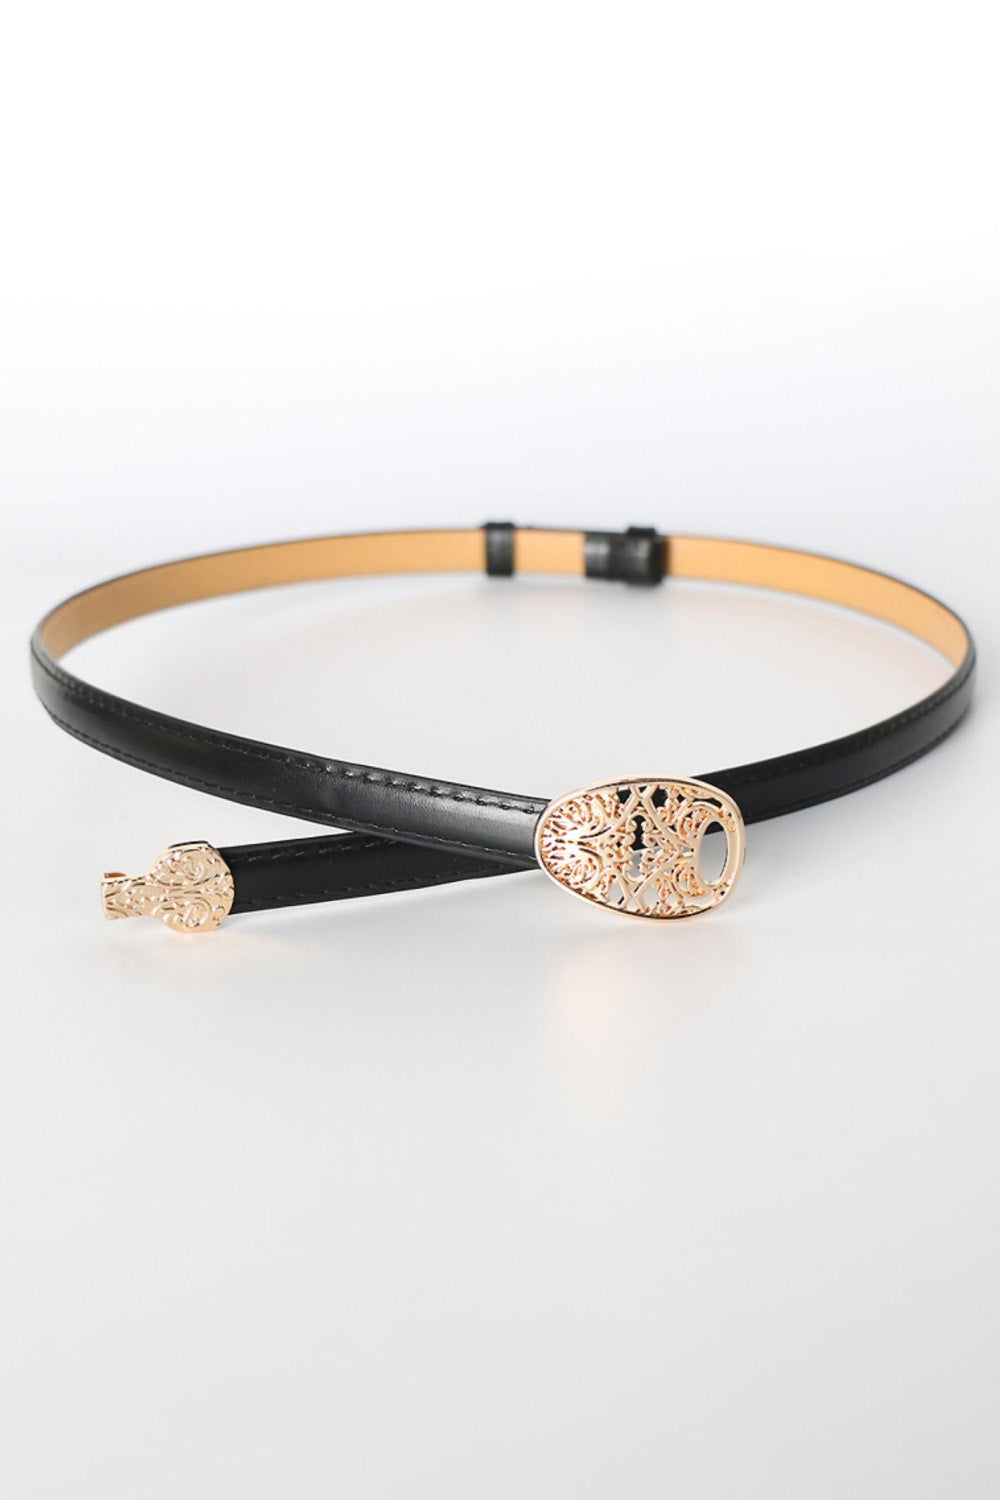 Skinny PU Leather Belt with Alloy Buckle - Belt - FITGGINS